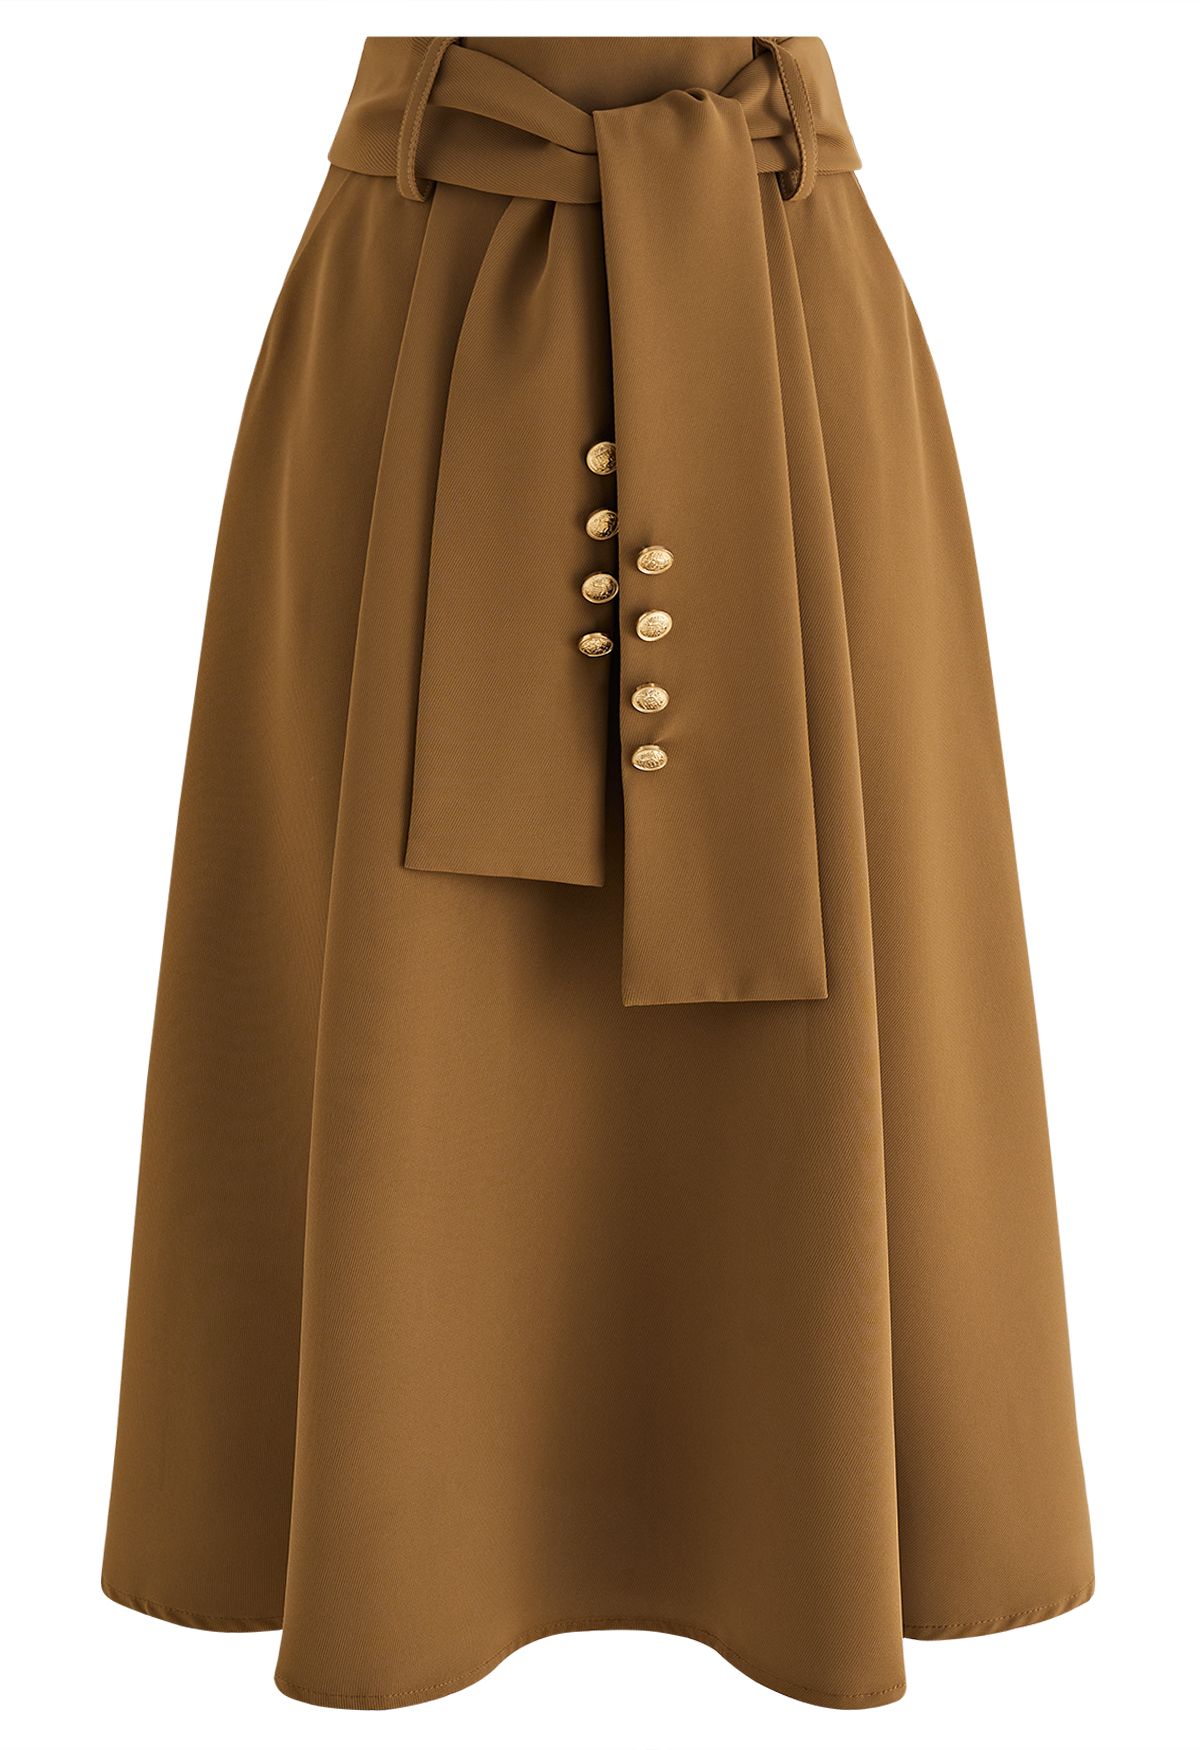 Buttoned Belted Flare Midi Skirt in Tan - Retro, Indie and Unique Fashion